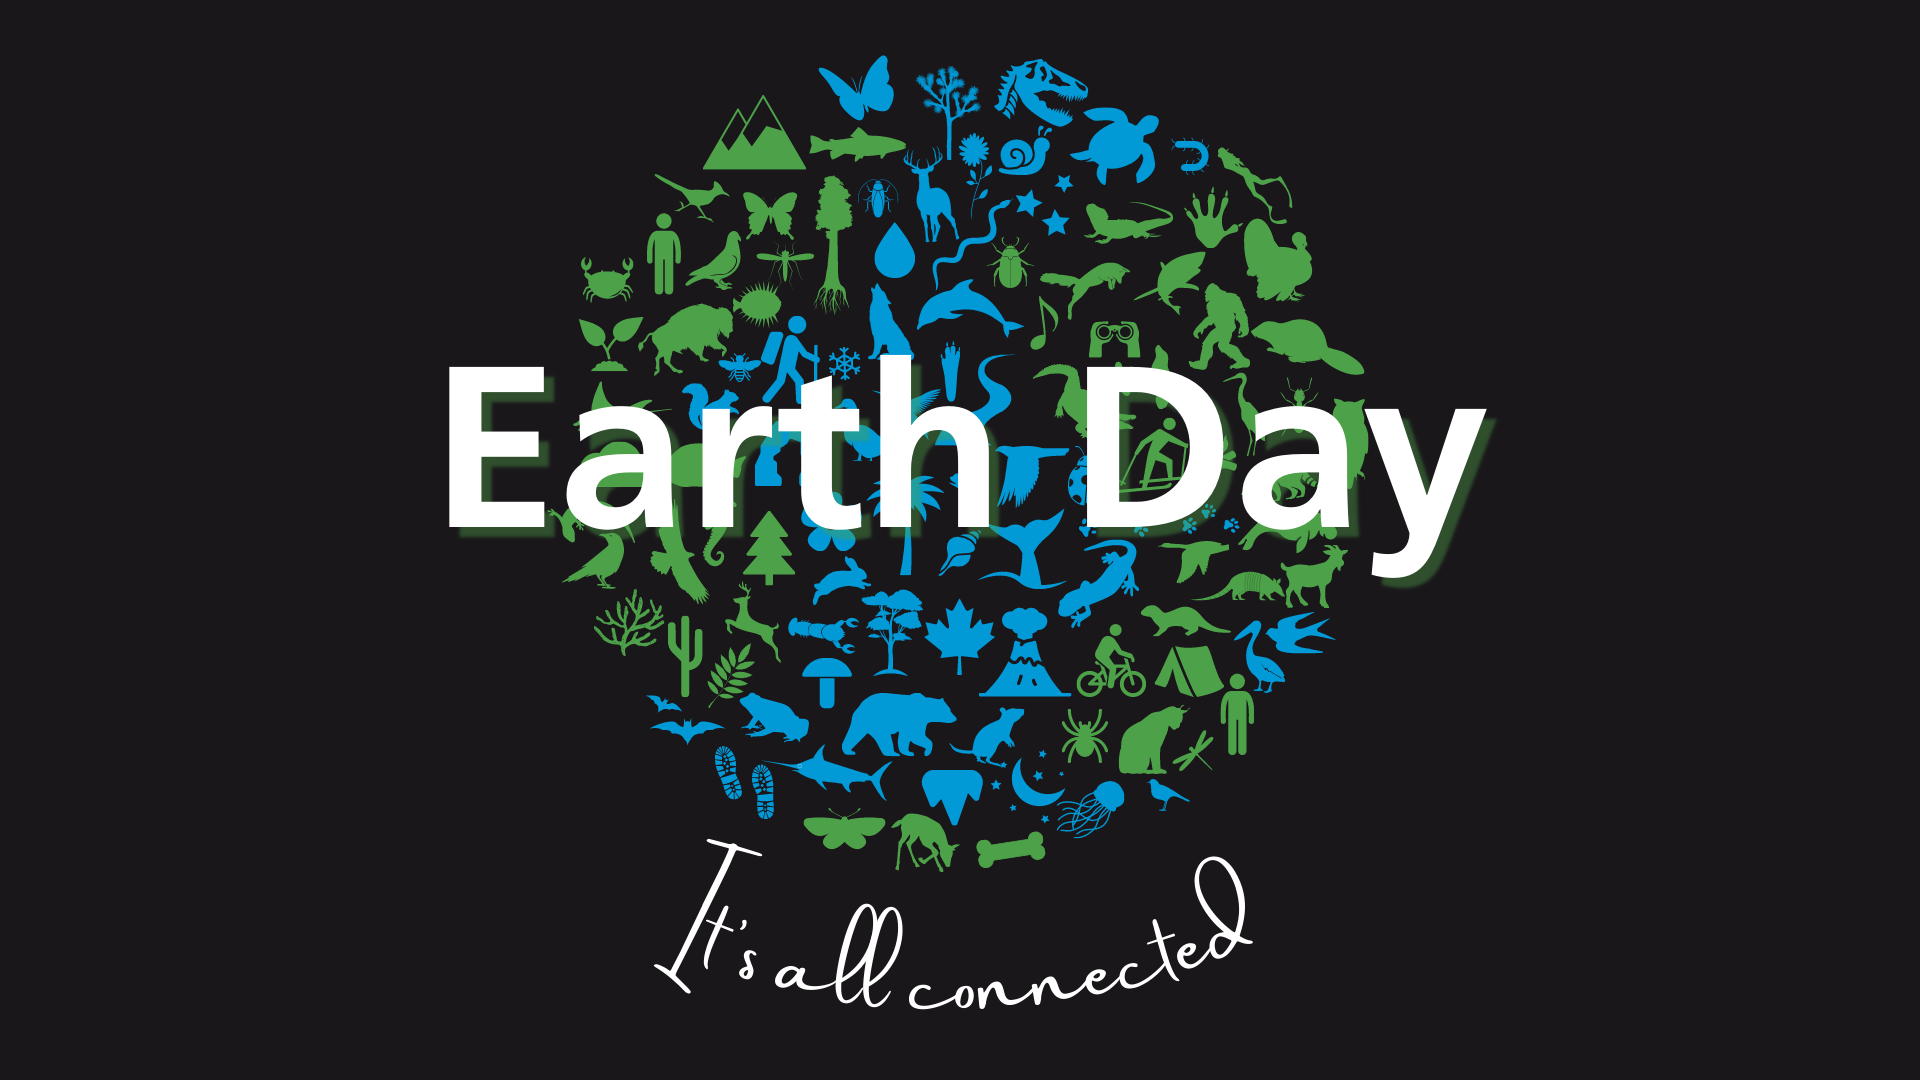 Illustration of a planet made out of park-related shapes with text reading "Earth Day. It's all connected"